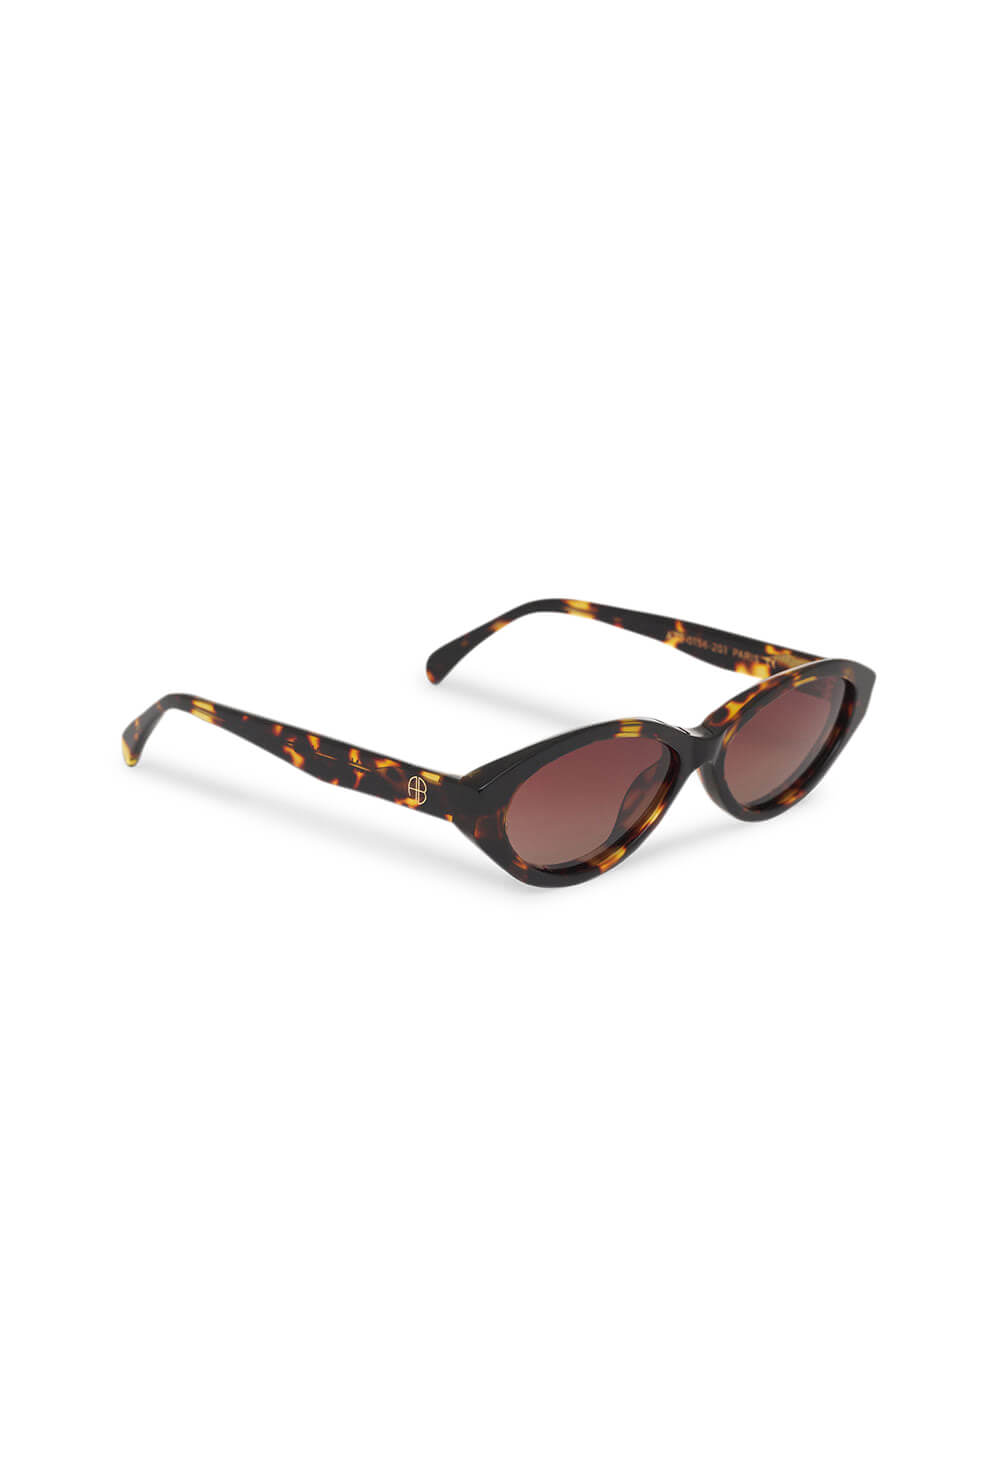 Anine Bing Paris Sunglasses in Dark Tortoise available at TNT The New Trend Australia. Free shipping for orders over $300 AUD.